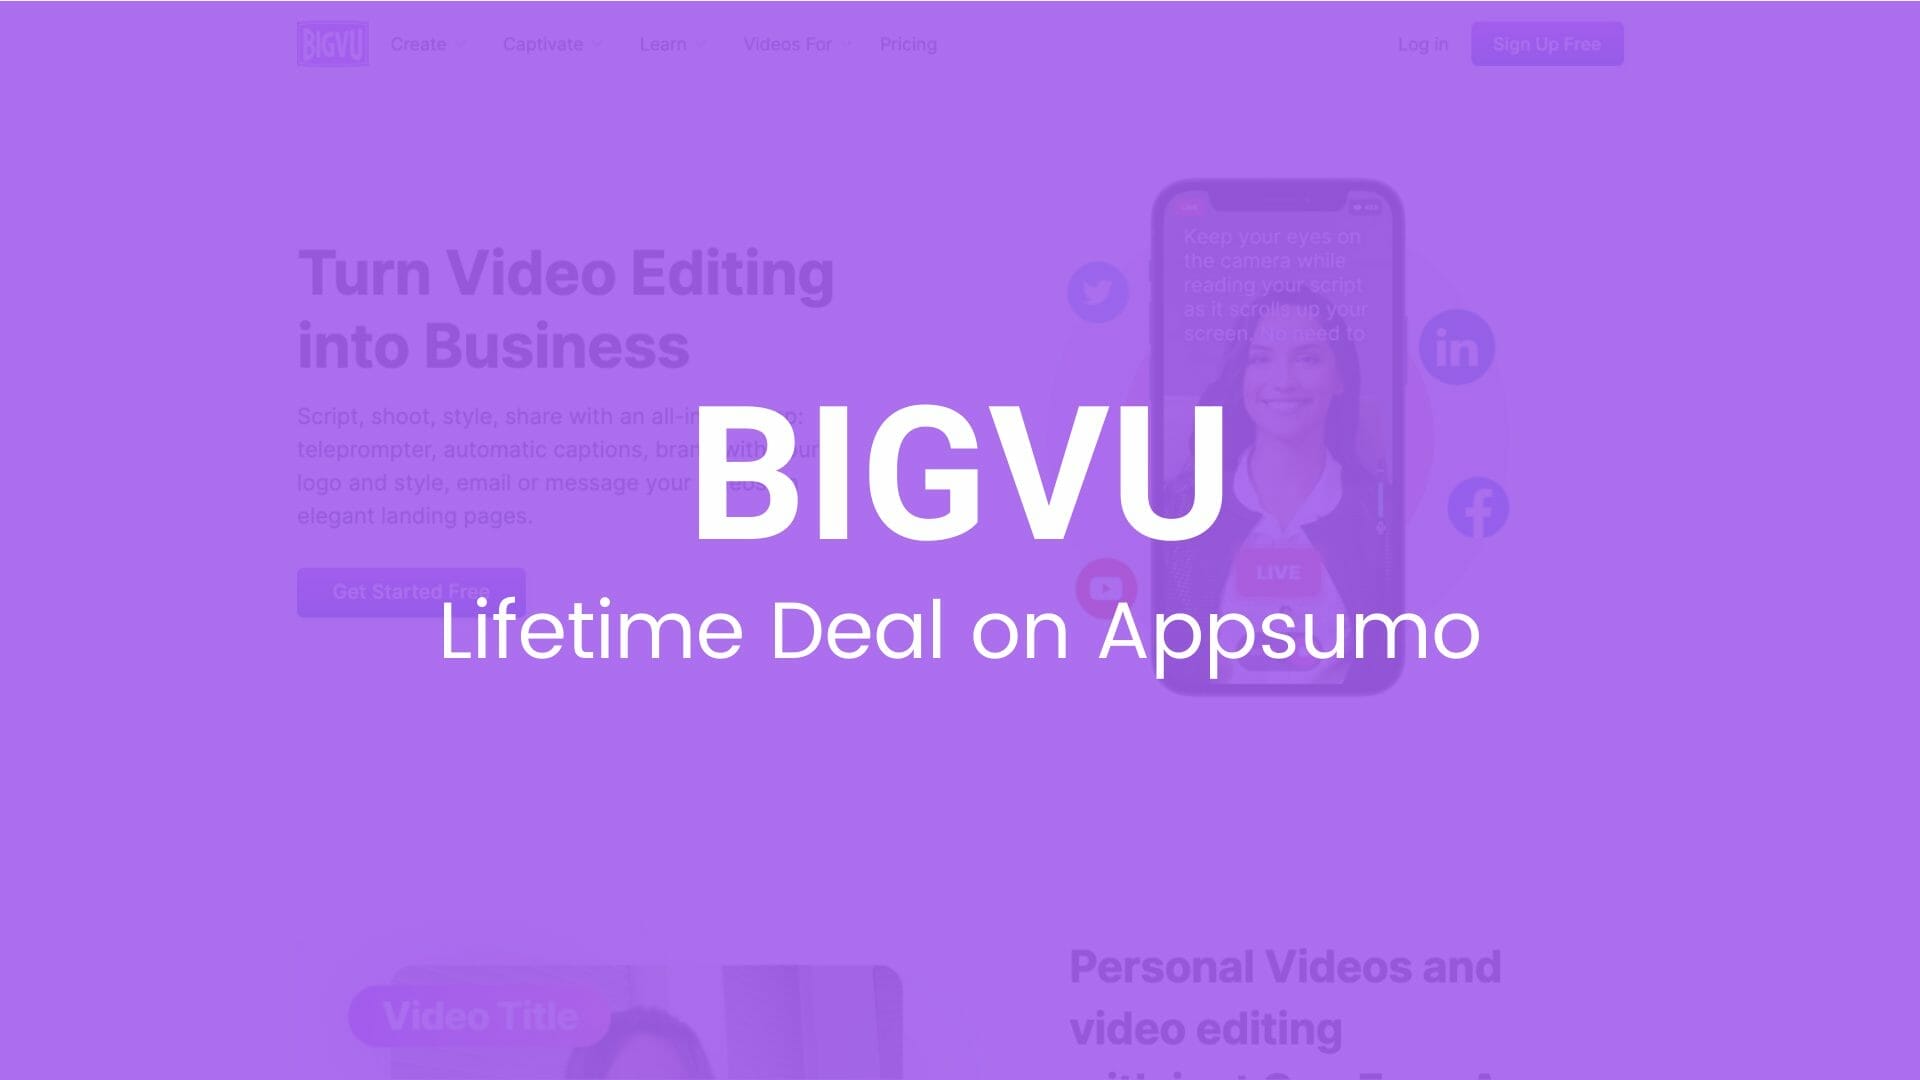 BIGVU: An All-in-One Video Studio Tool For Producing Professional Content